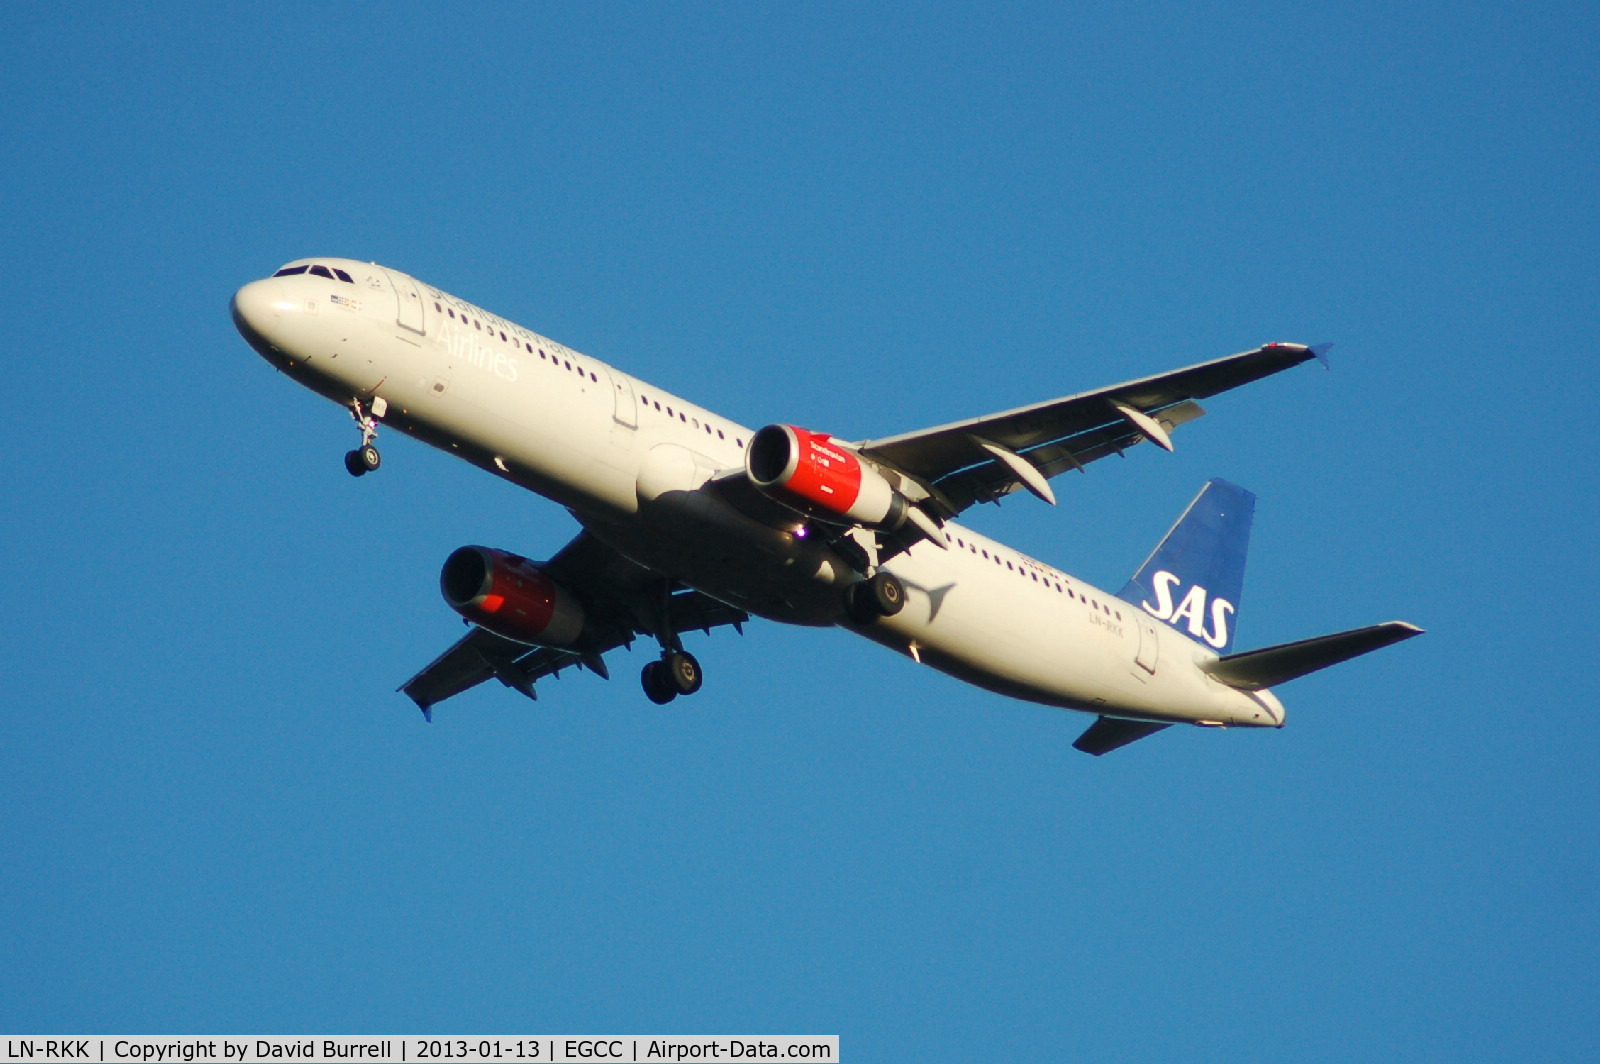 LN-RKK, 2002 Airbus A321-232 C/N 1848, Scandinavian Airlines Airbus A321-232 LN-RKK on approach to Manchester Airport.